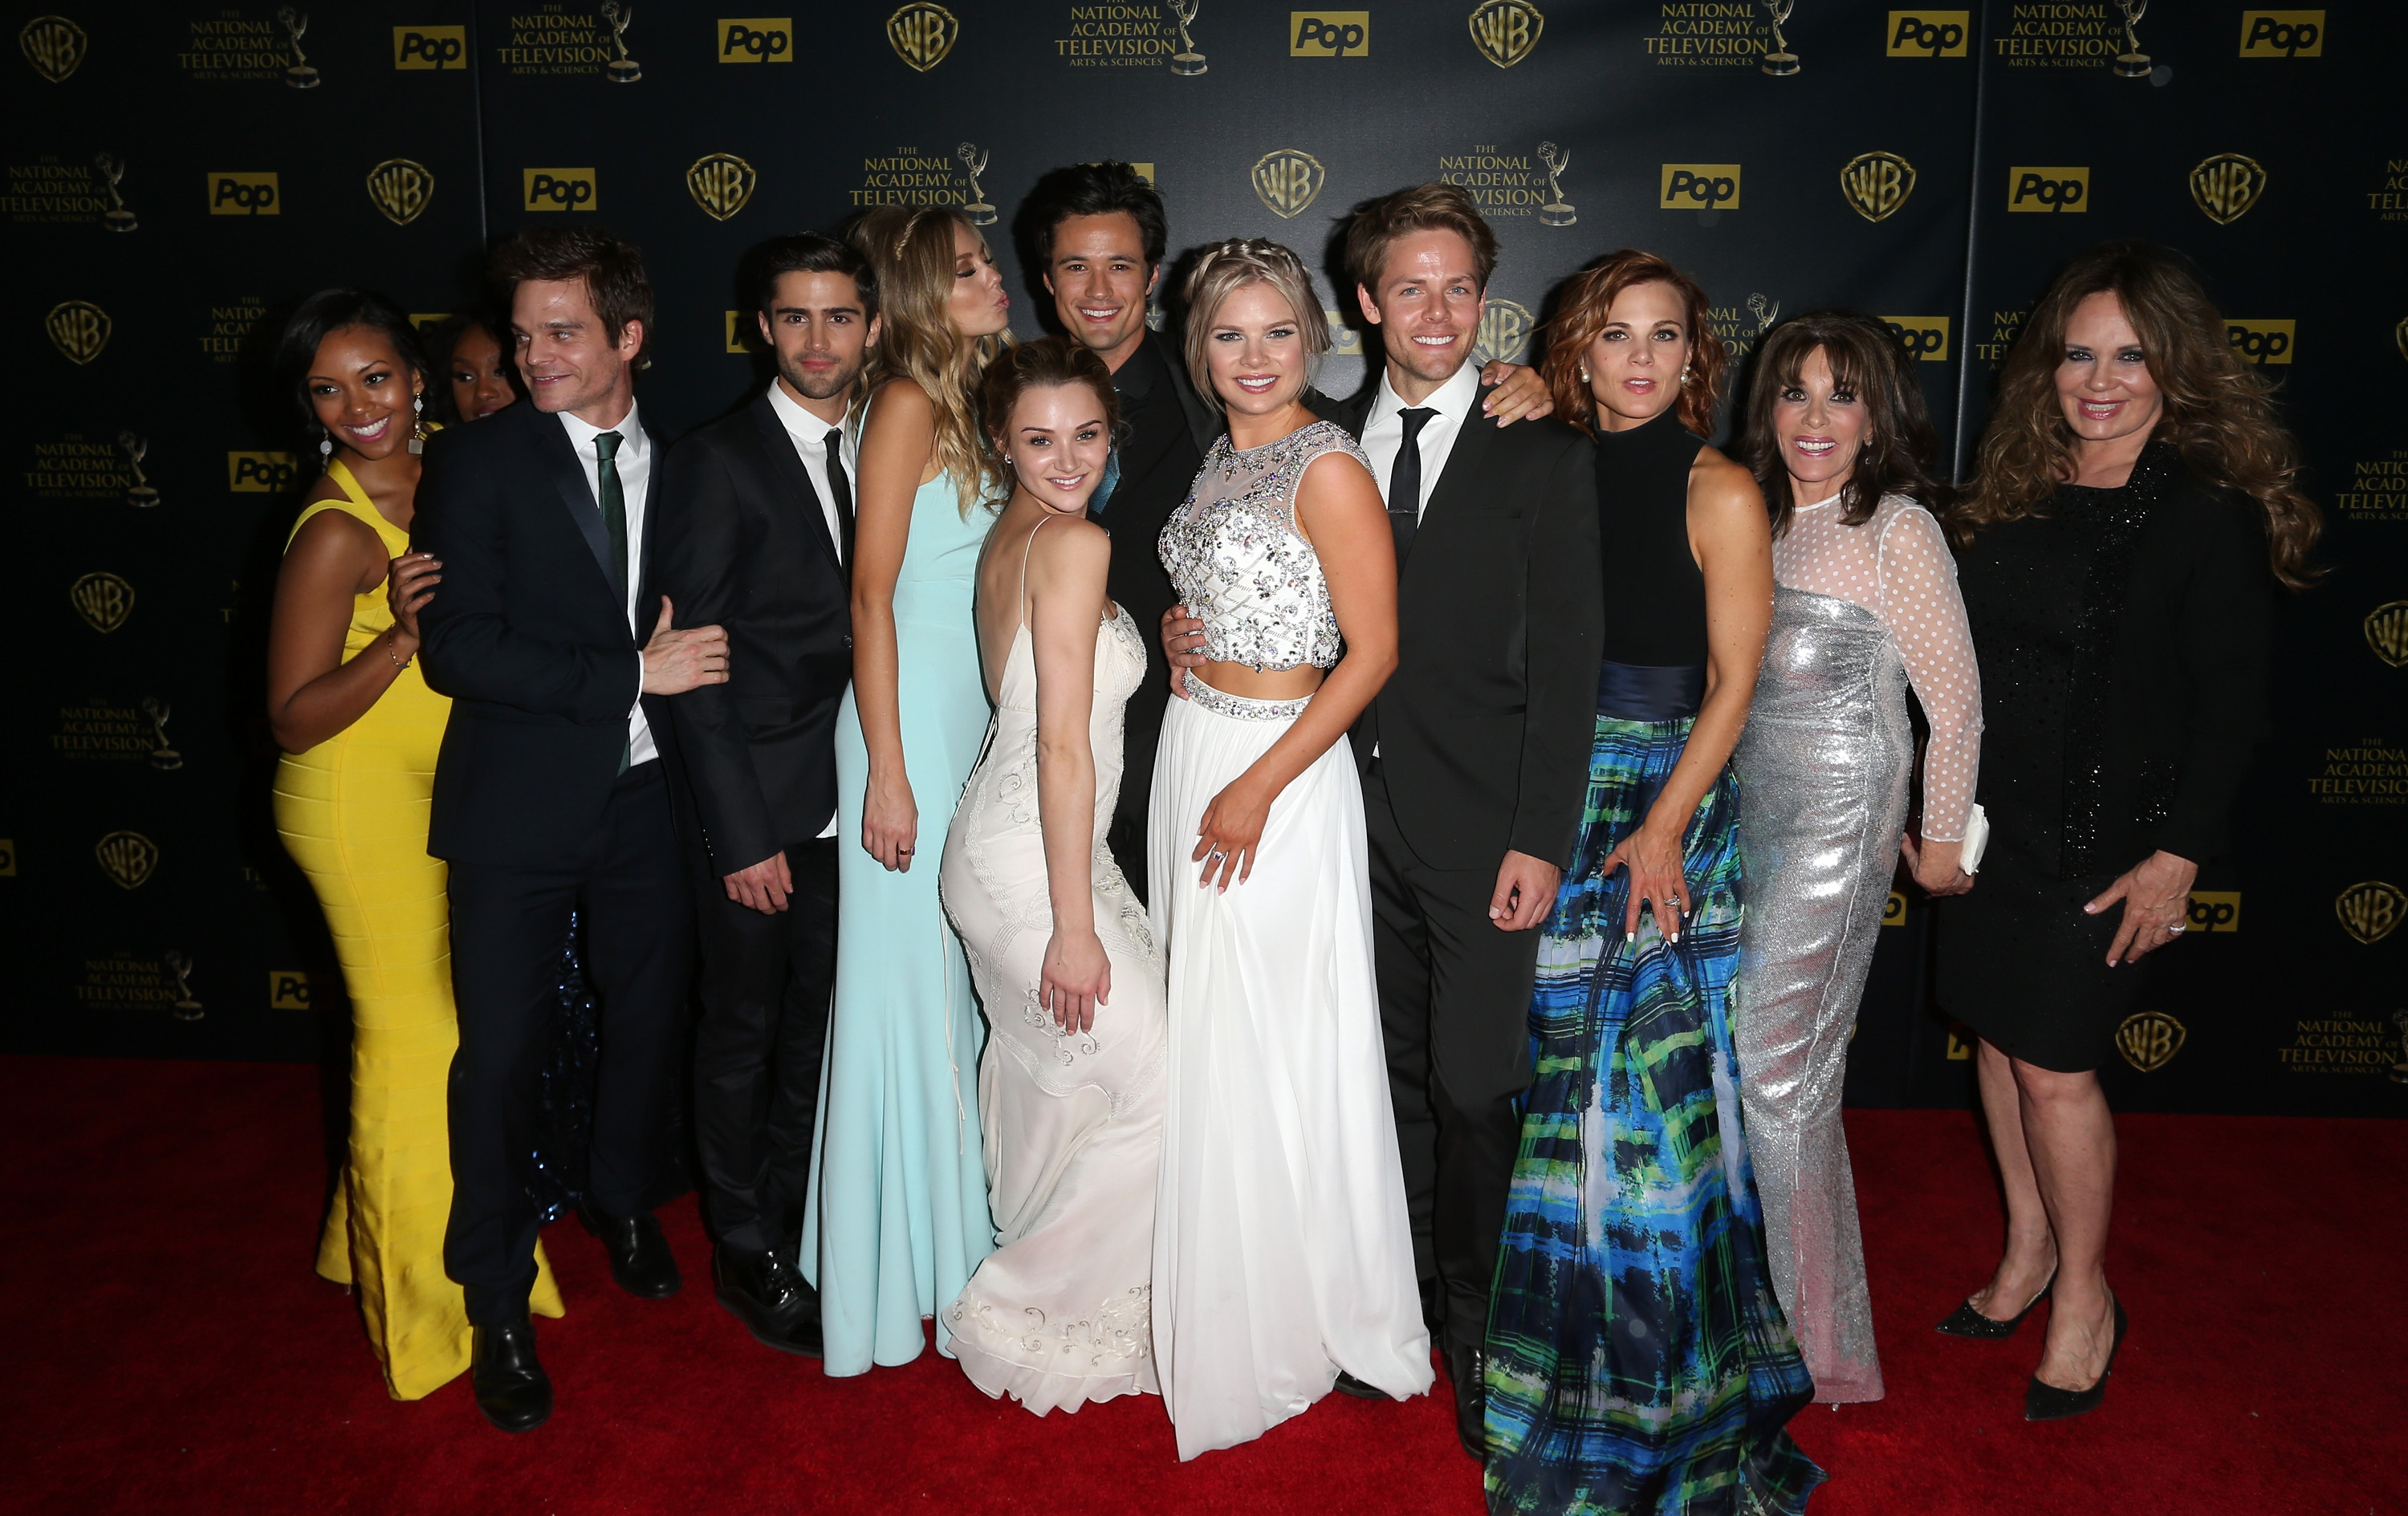 'The Young and the Restless' cast poses for a group photo on the Daytime Emmys red carpet.